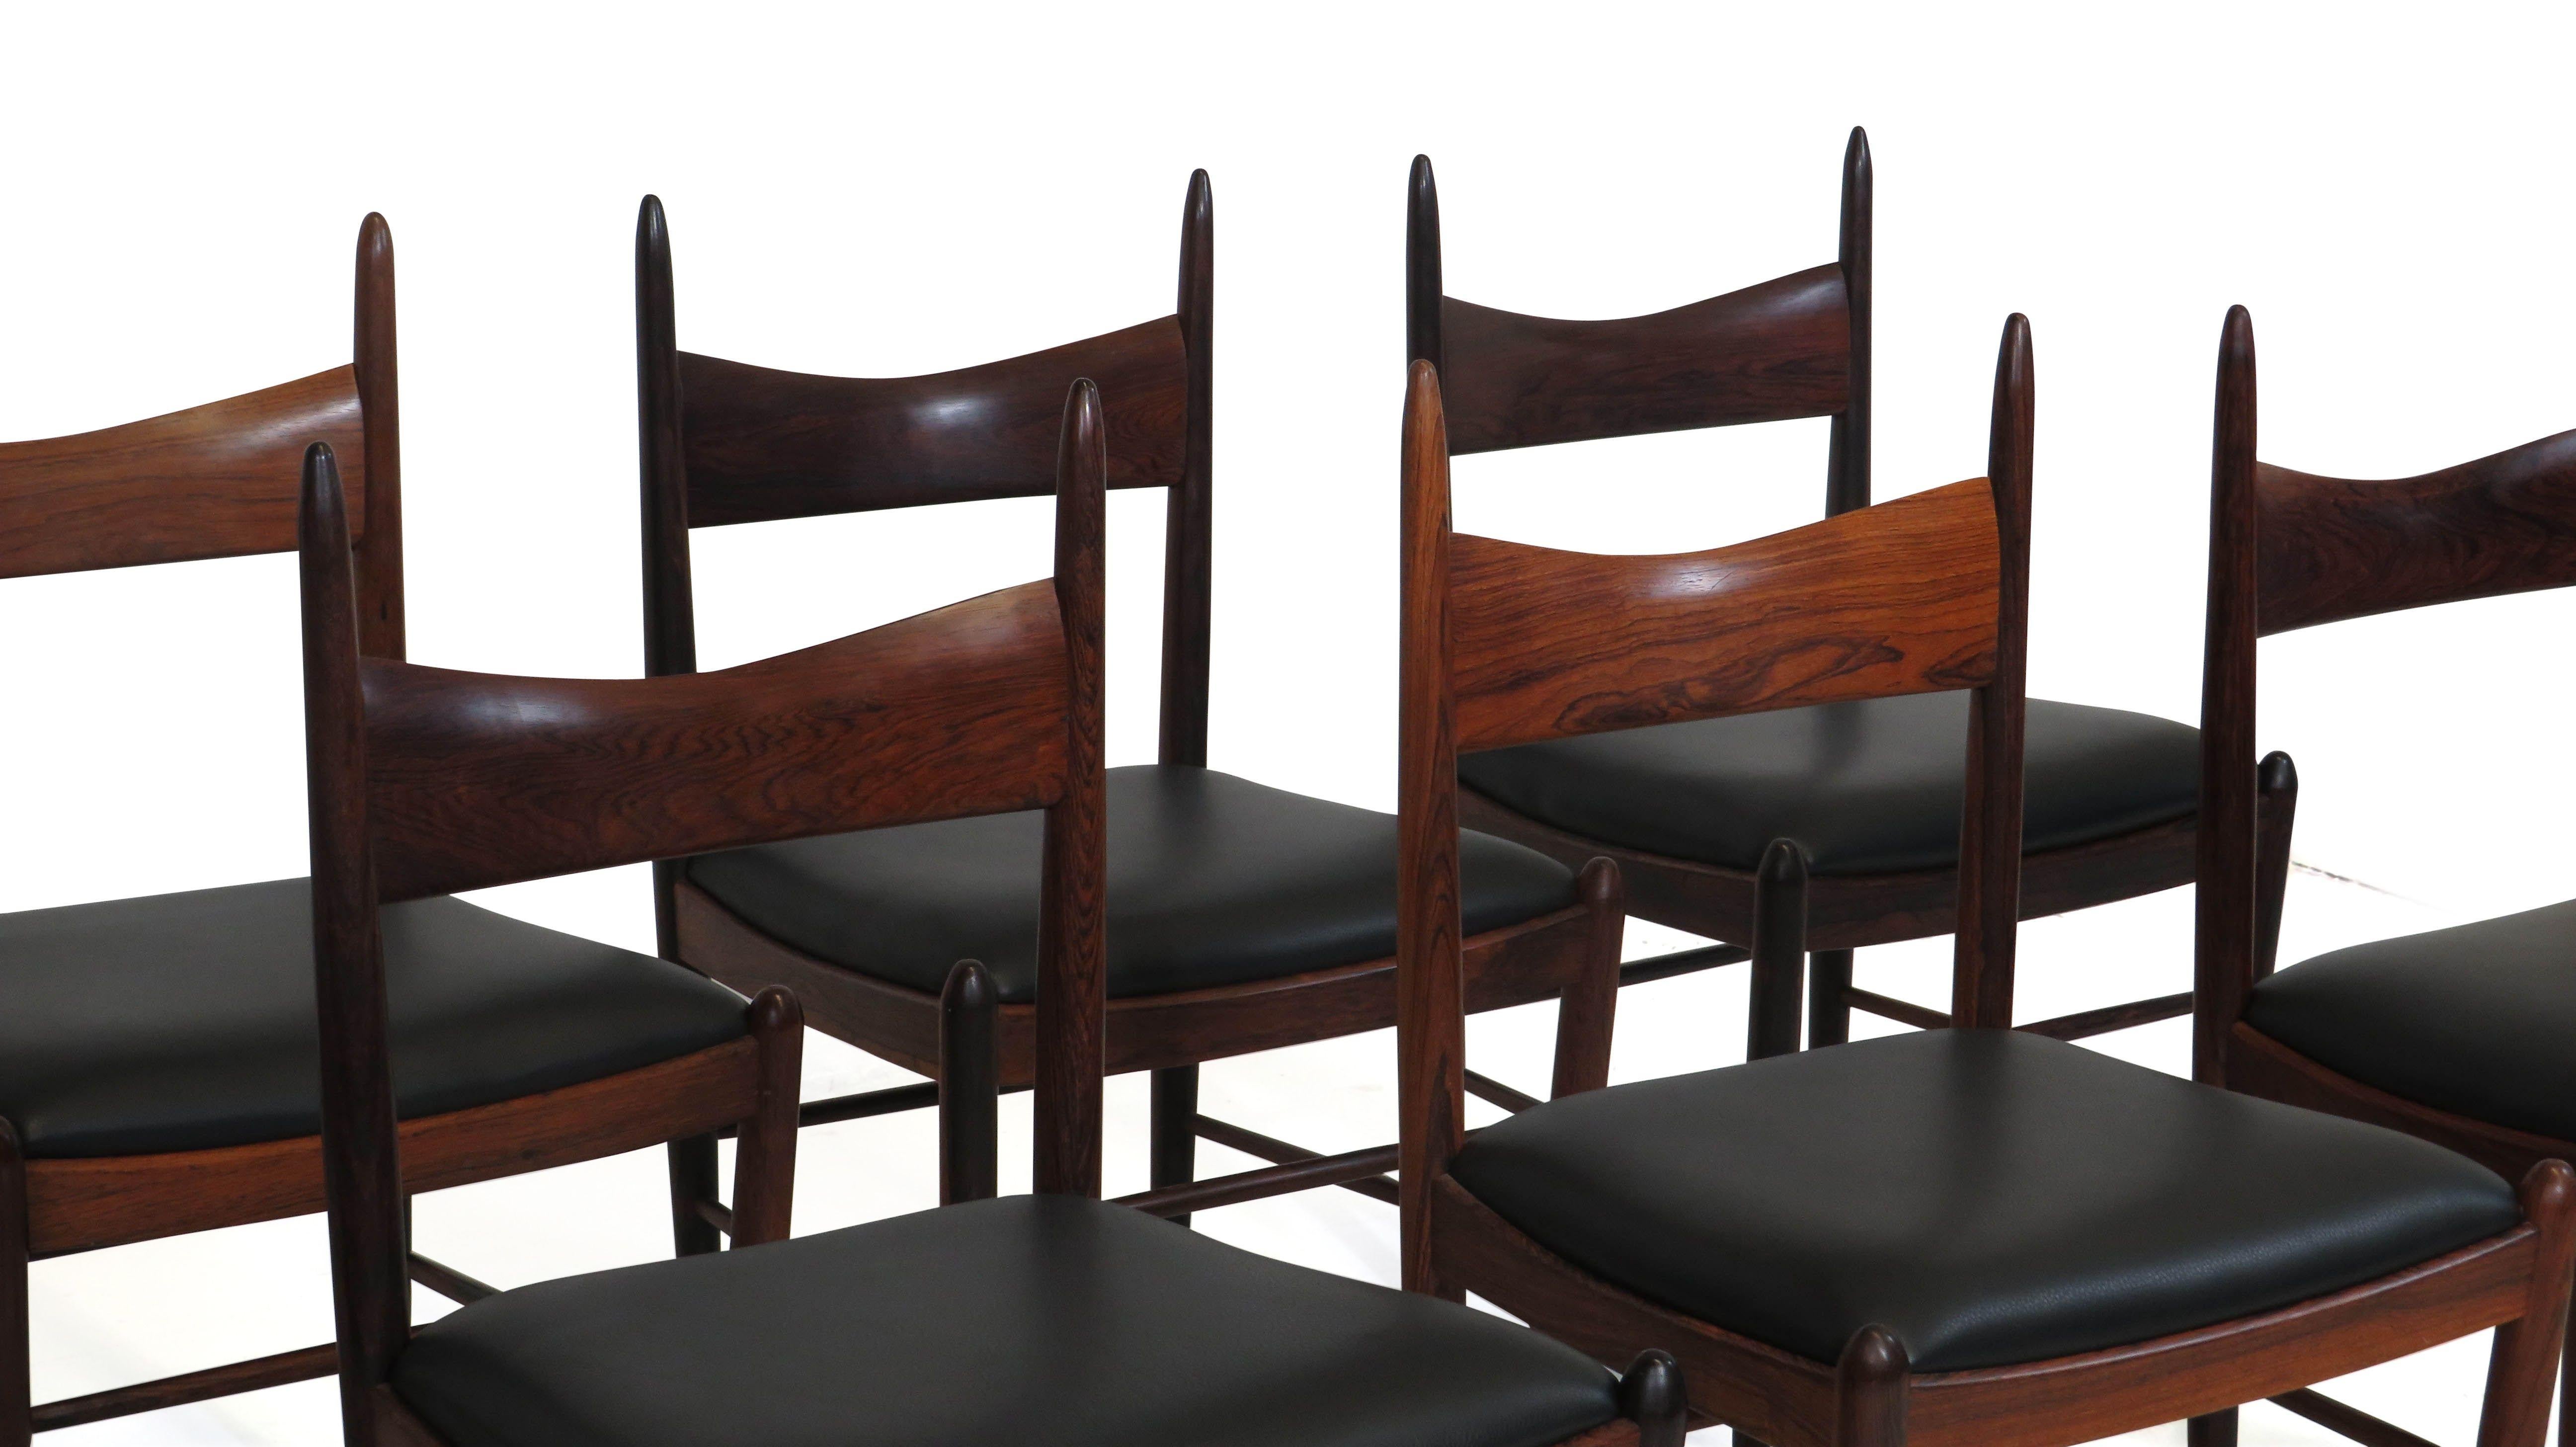 Stunning set of 8 dining chairs handcrafted of solid Brazilian rosewood with sculpted backs and turned legs; newly upholstered in fine black leather. Strong construction and sturdy. These chairs have been fully restored and in excellent condition.